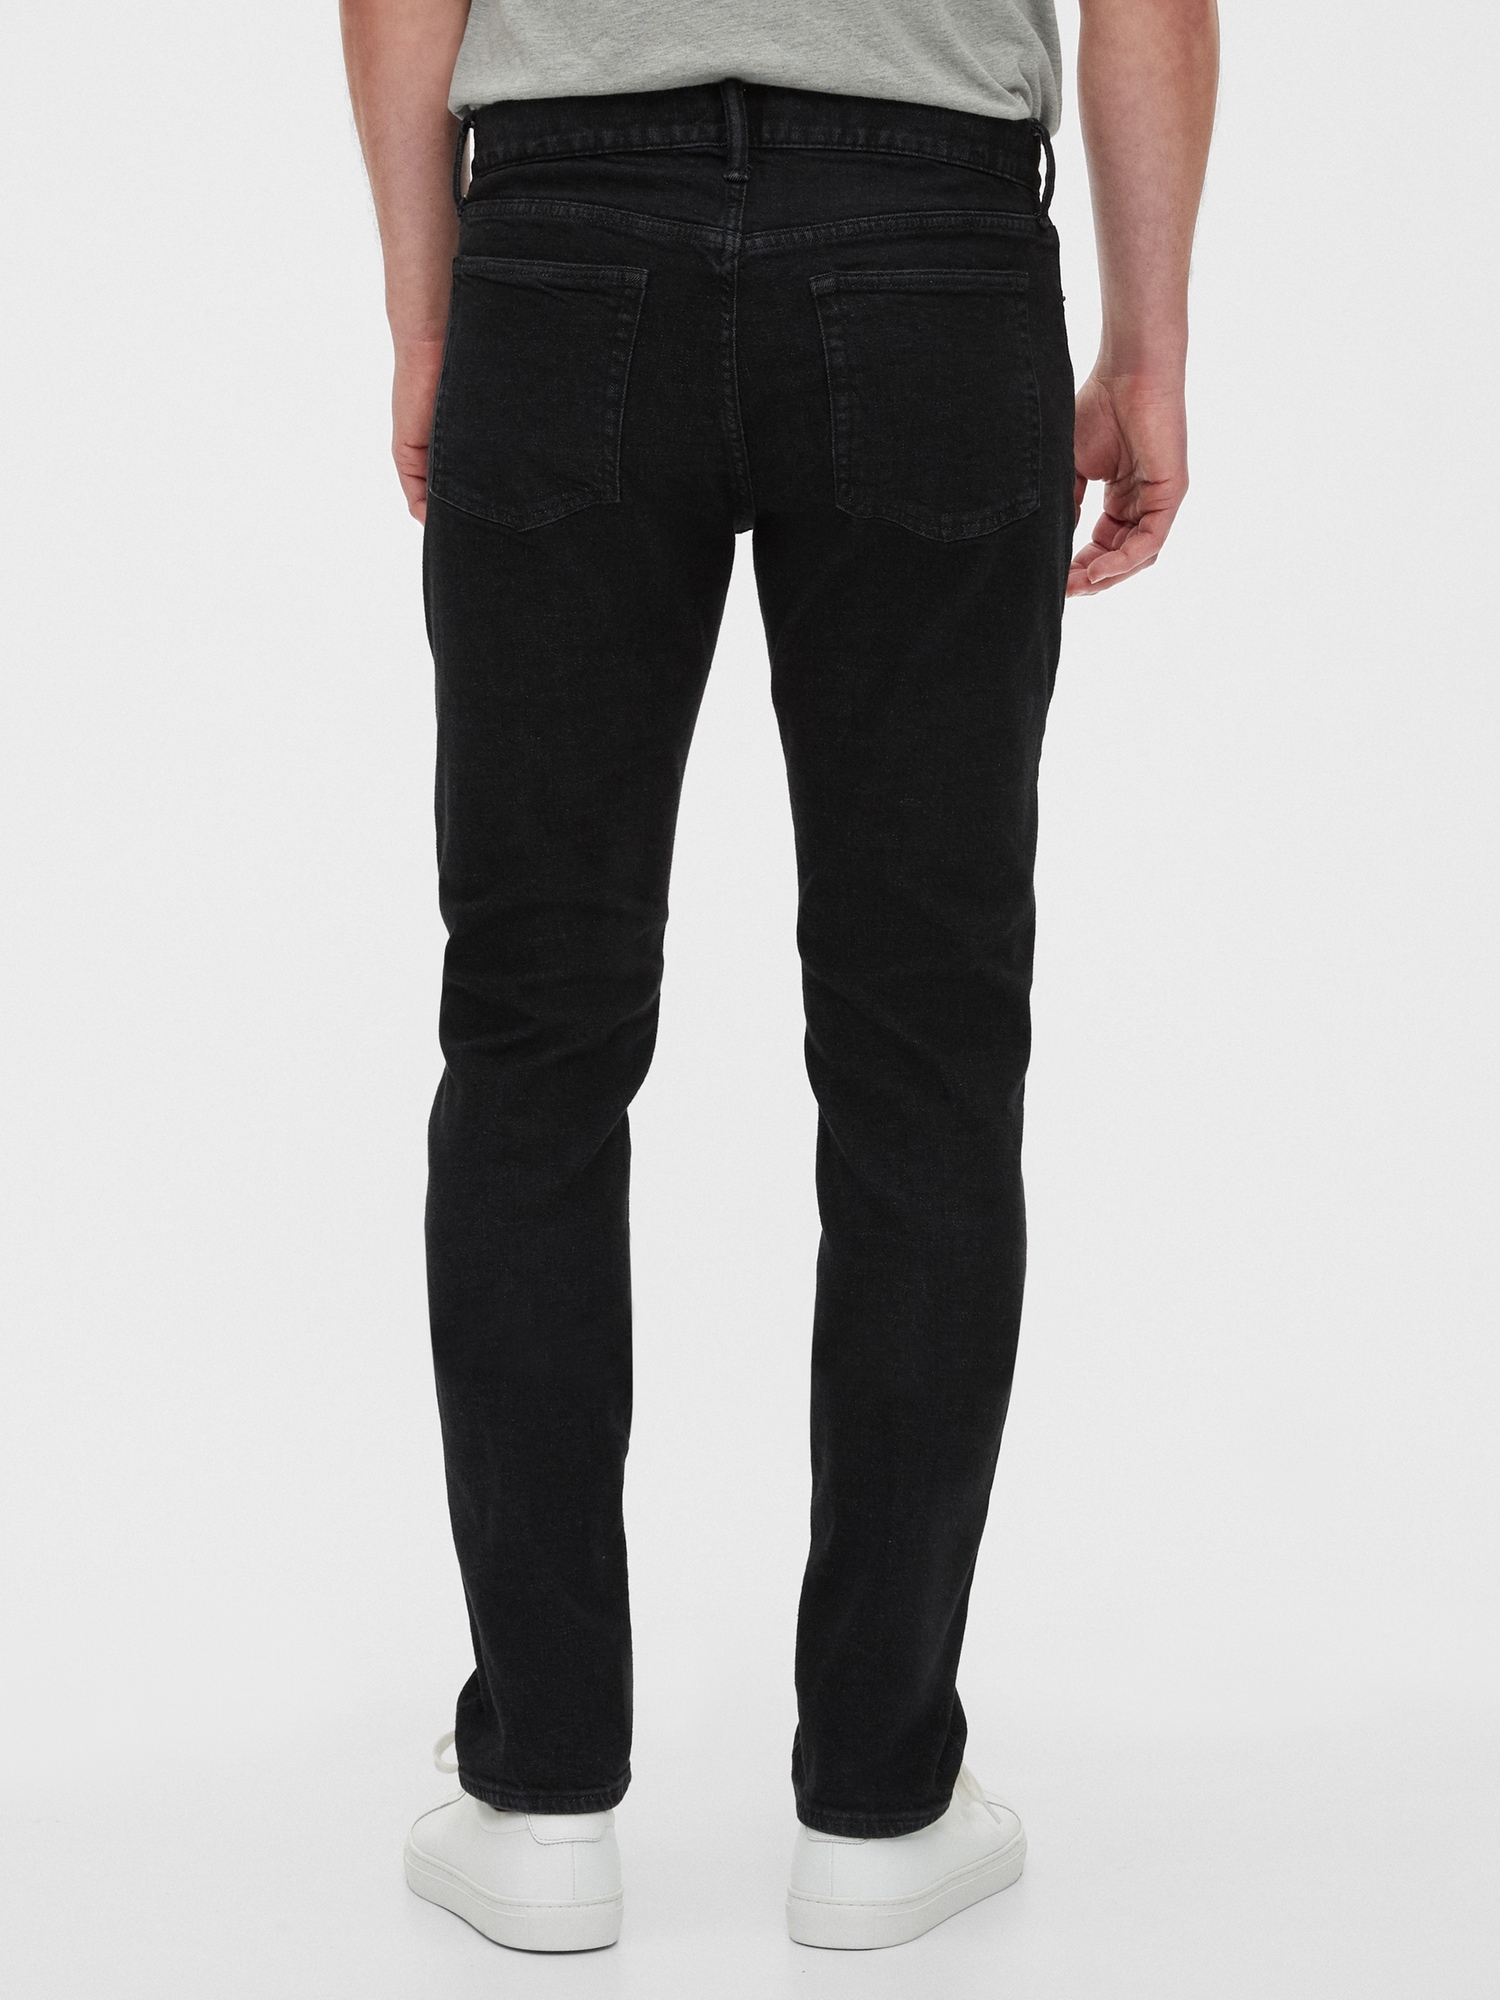 Slim Taper Gapflex Jeans With Washwell™ | Gap Factory